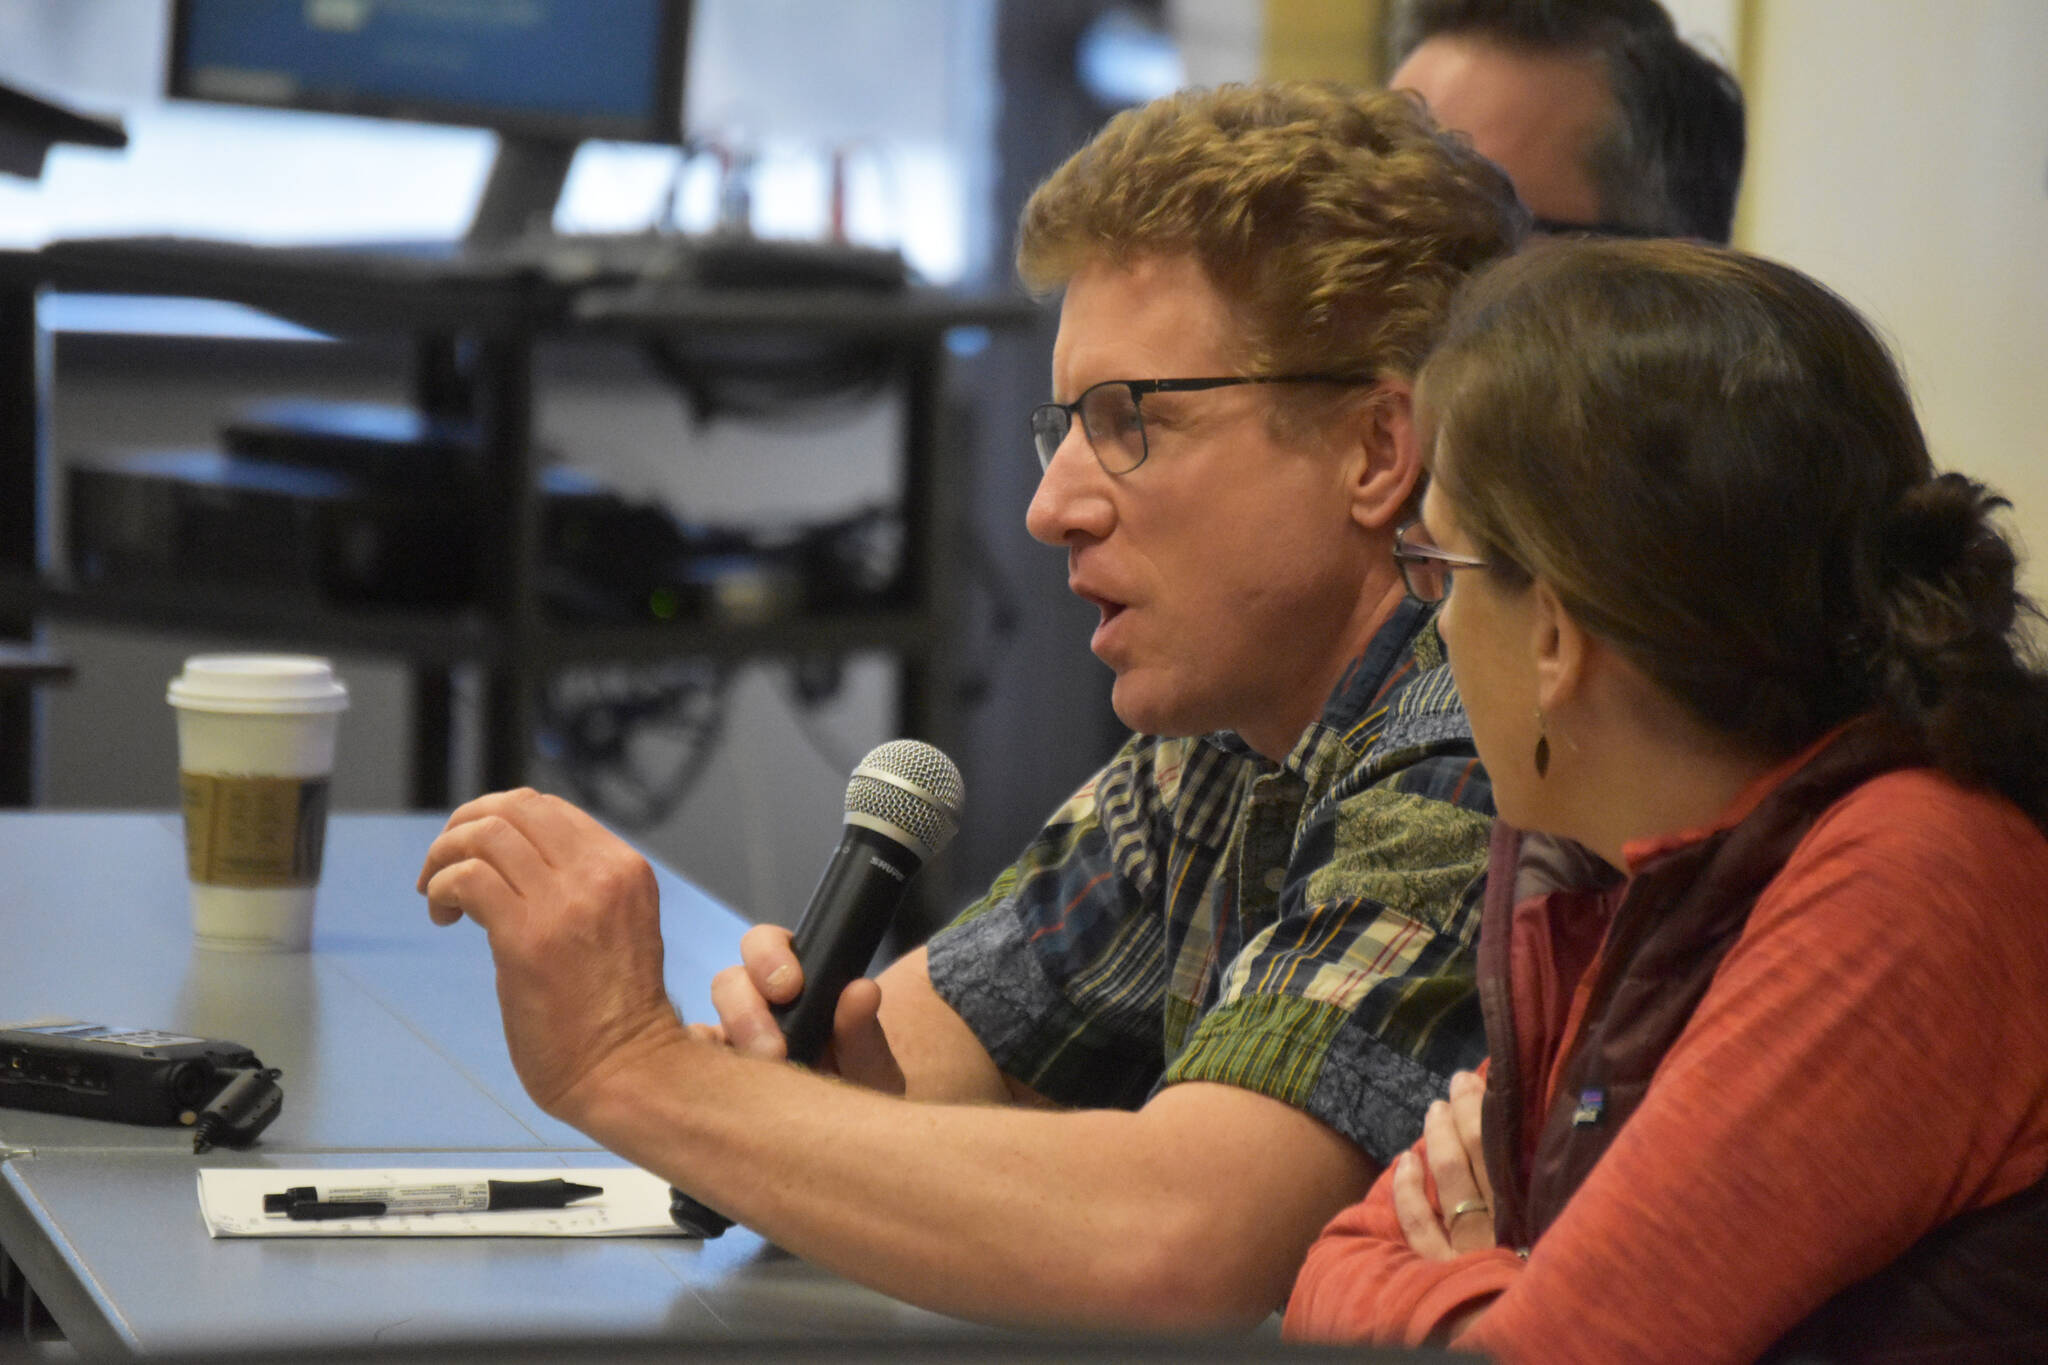 Department of Fish and Game Biologist Adam Reimer responds to a question during a panel discussion for the Kenai Peninsula College Showcase “State of the Salmon” on Wednesday, April 20, 2023, at KPC in Soldotna, Alaska. (Jake Dye/Peninsula Clarion)